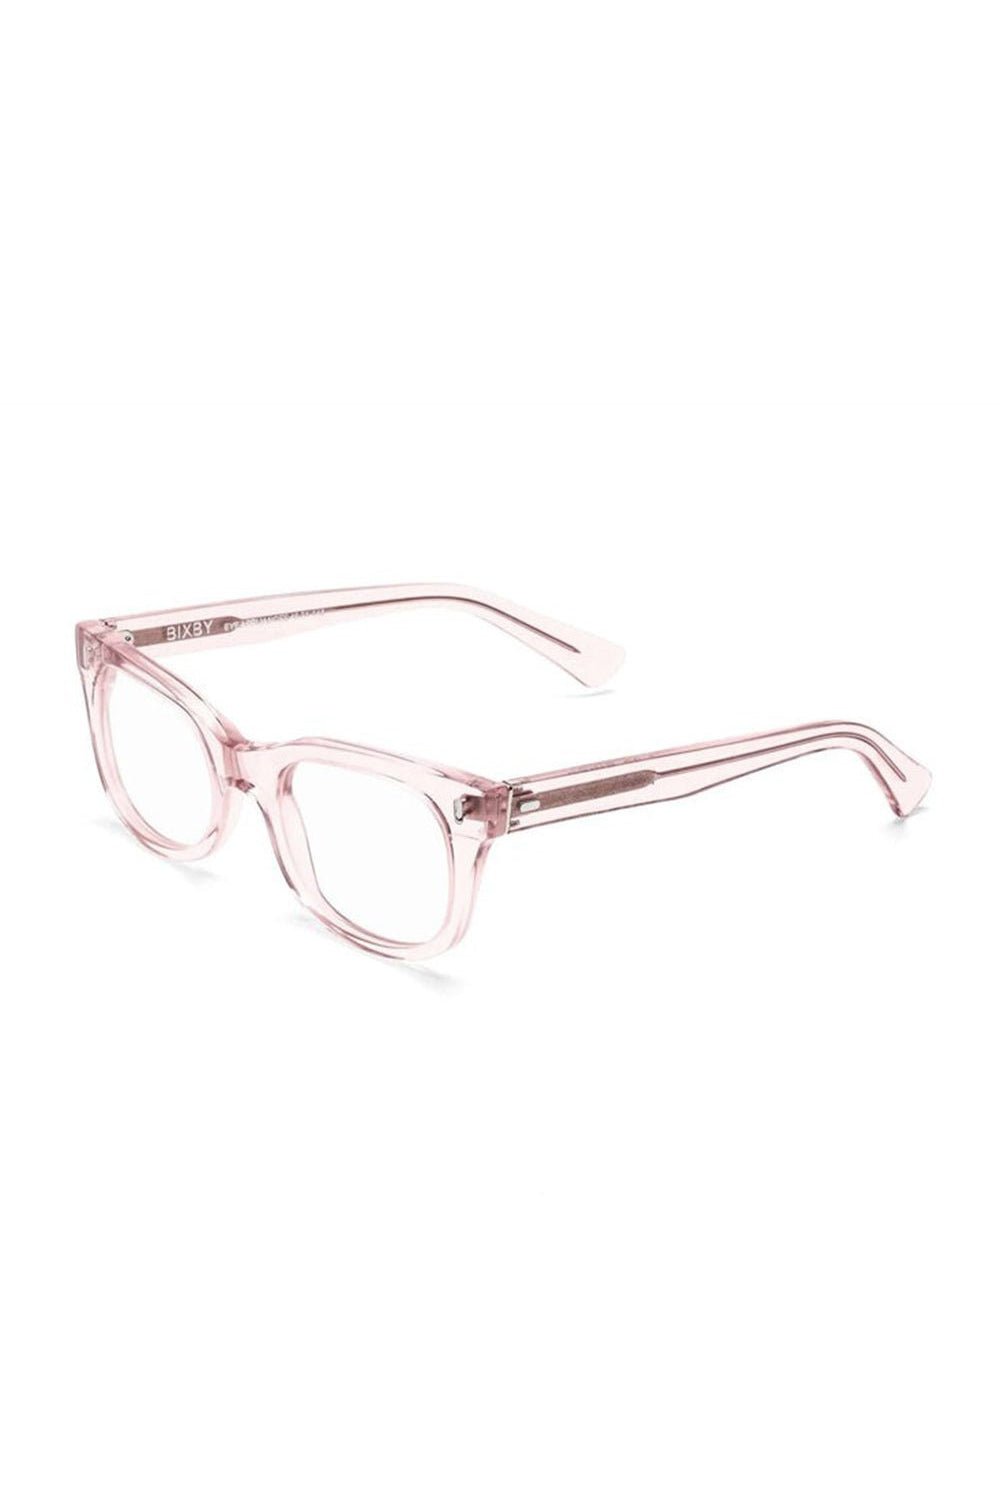 CADDIS-Bixby Compact Reading Glasses - Clear Pink-